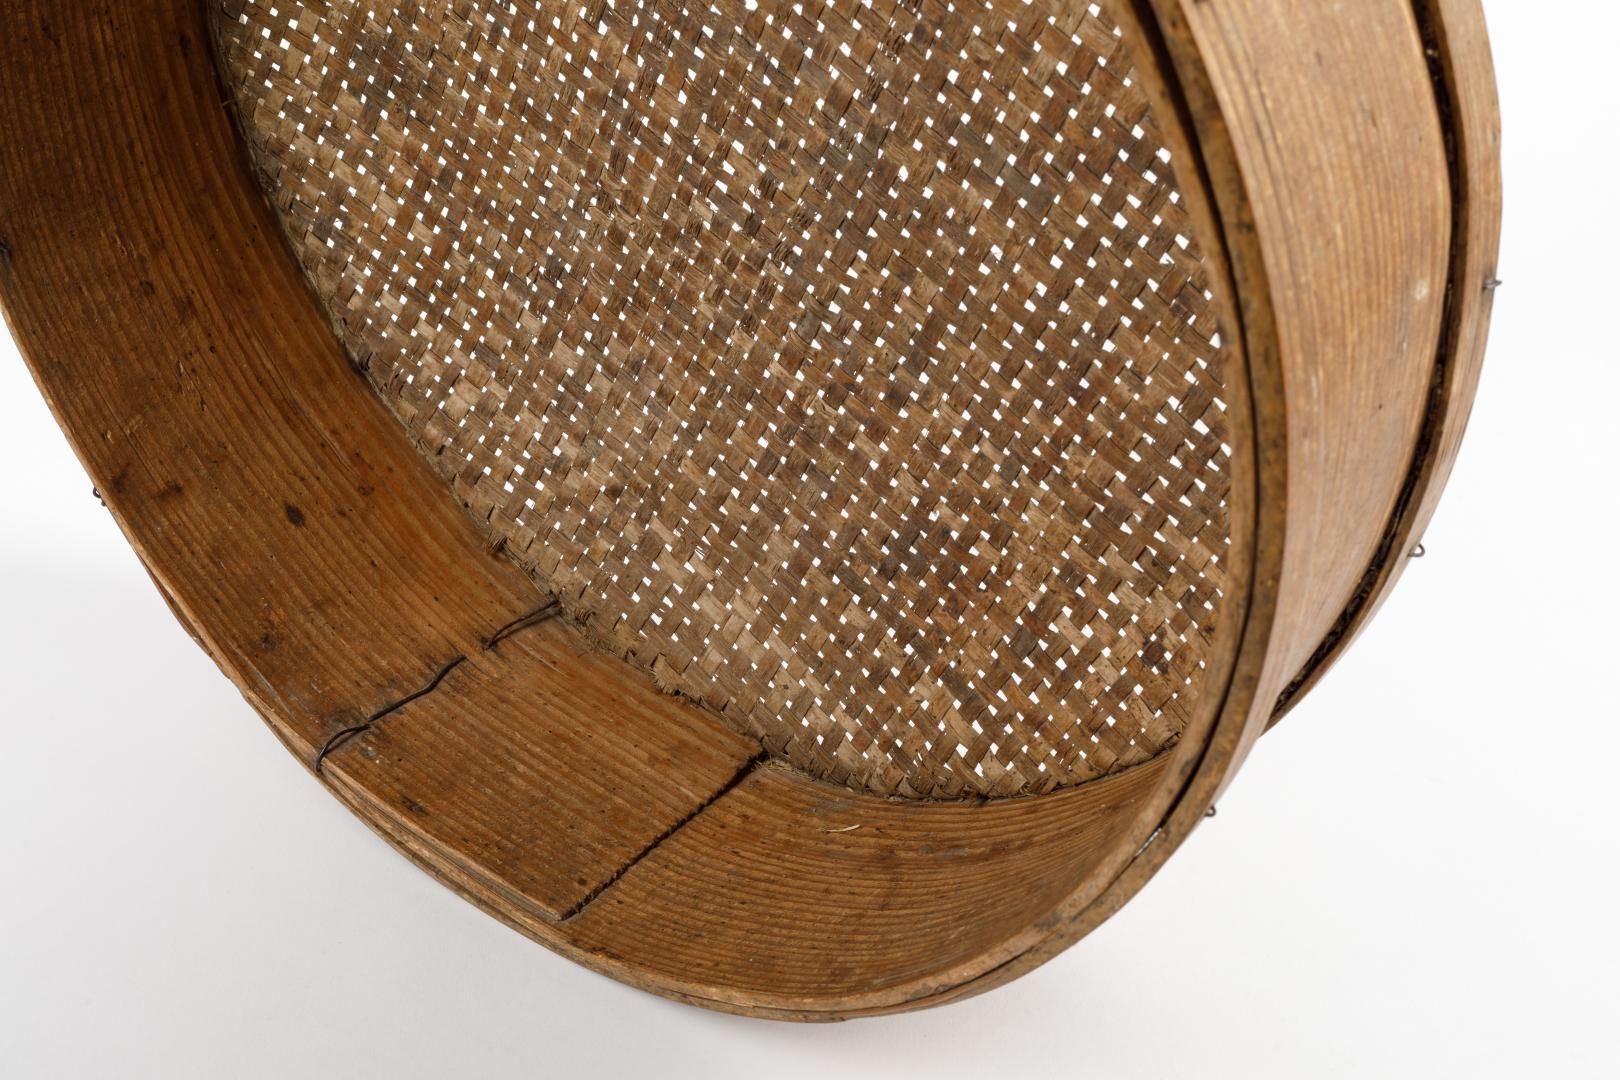 Small sieve typically with a handle